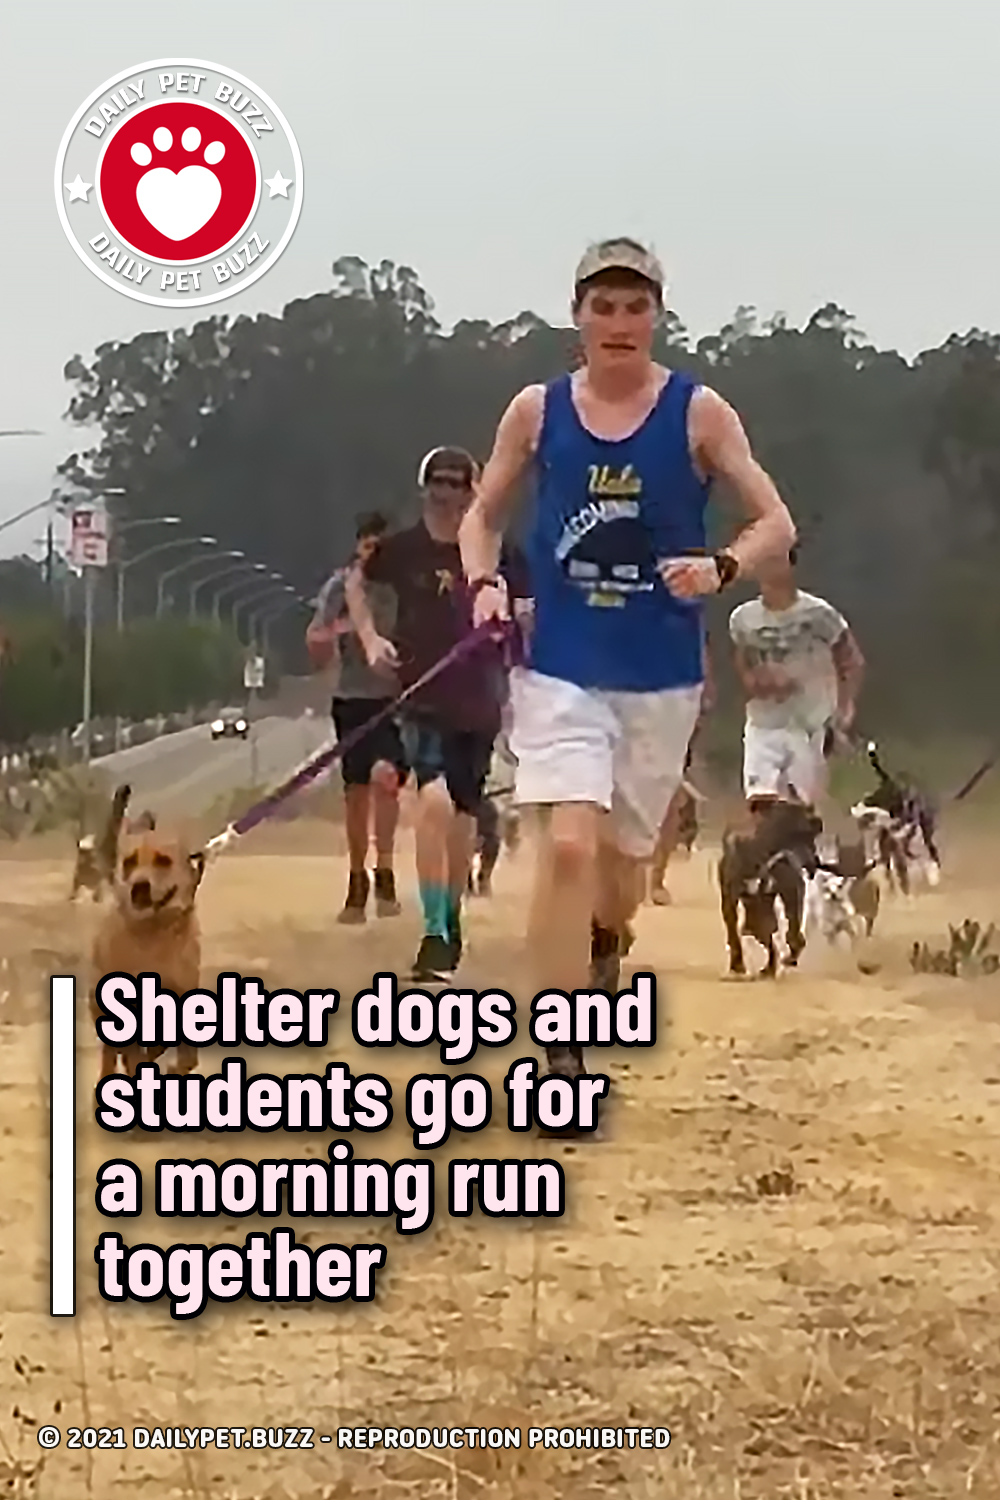 Shelter dogs and students go for a morning run together